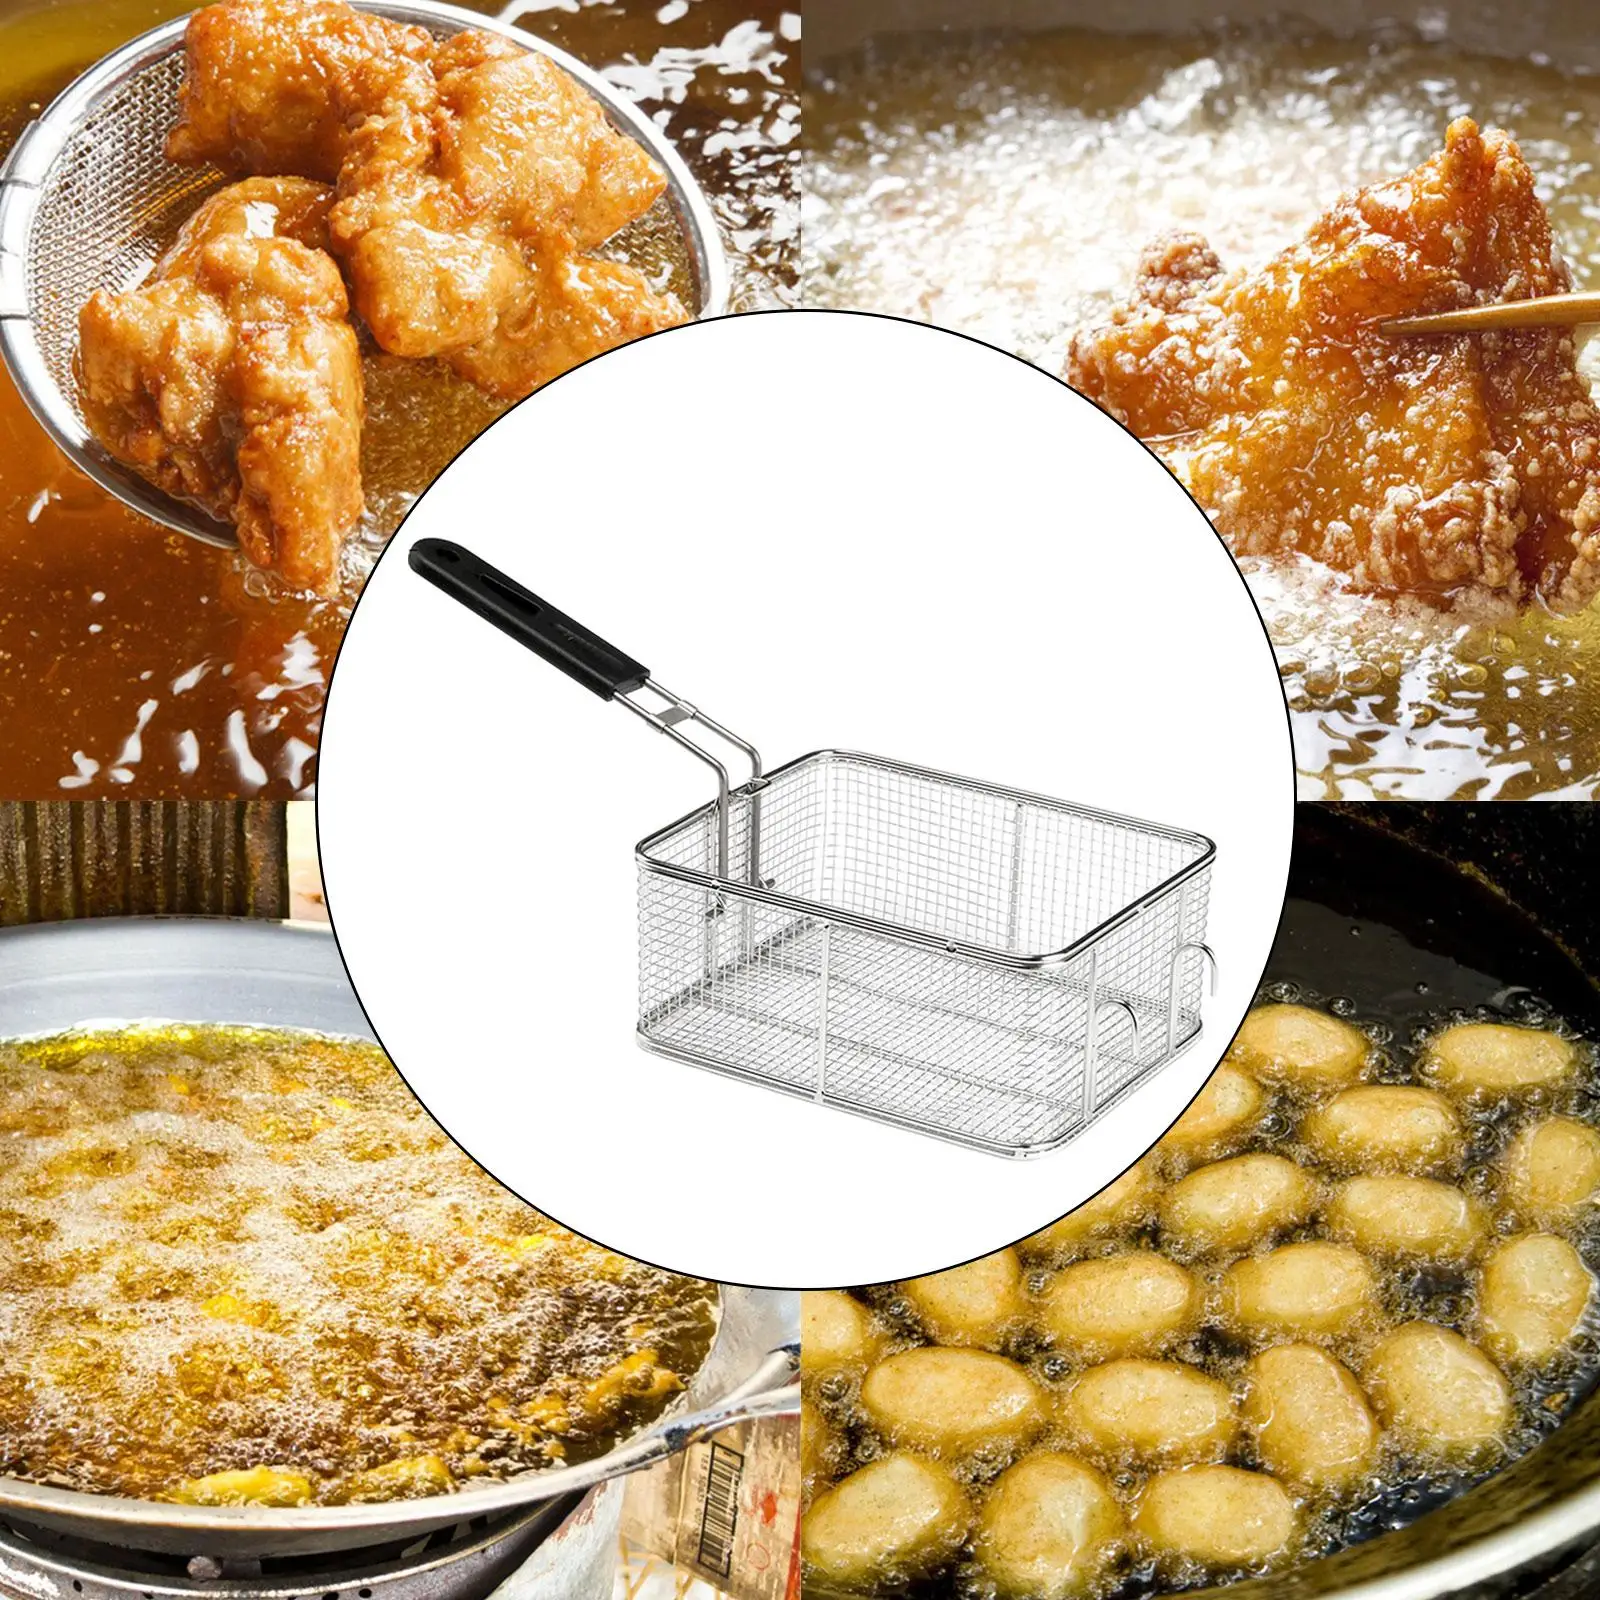 Fryer Basket Kitchen Cooking Tool with Non Slip Handle Colander Drain Frying Basket for Party Home Barbecue Restaurant Kitchen